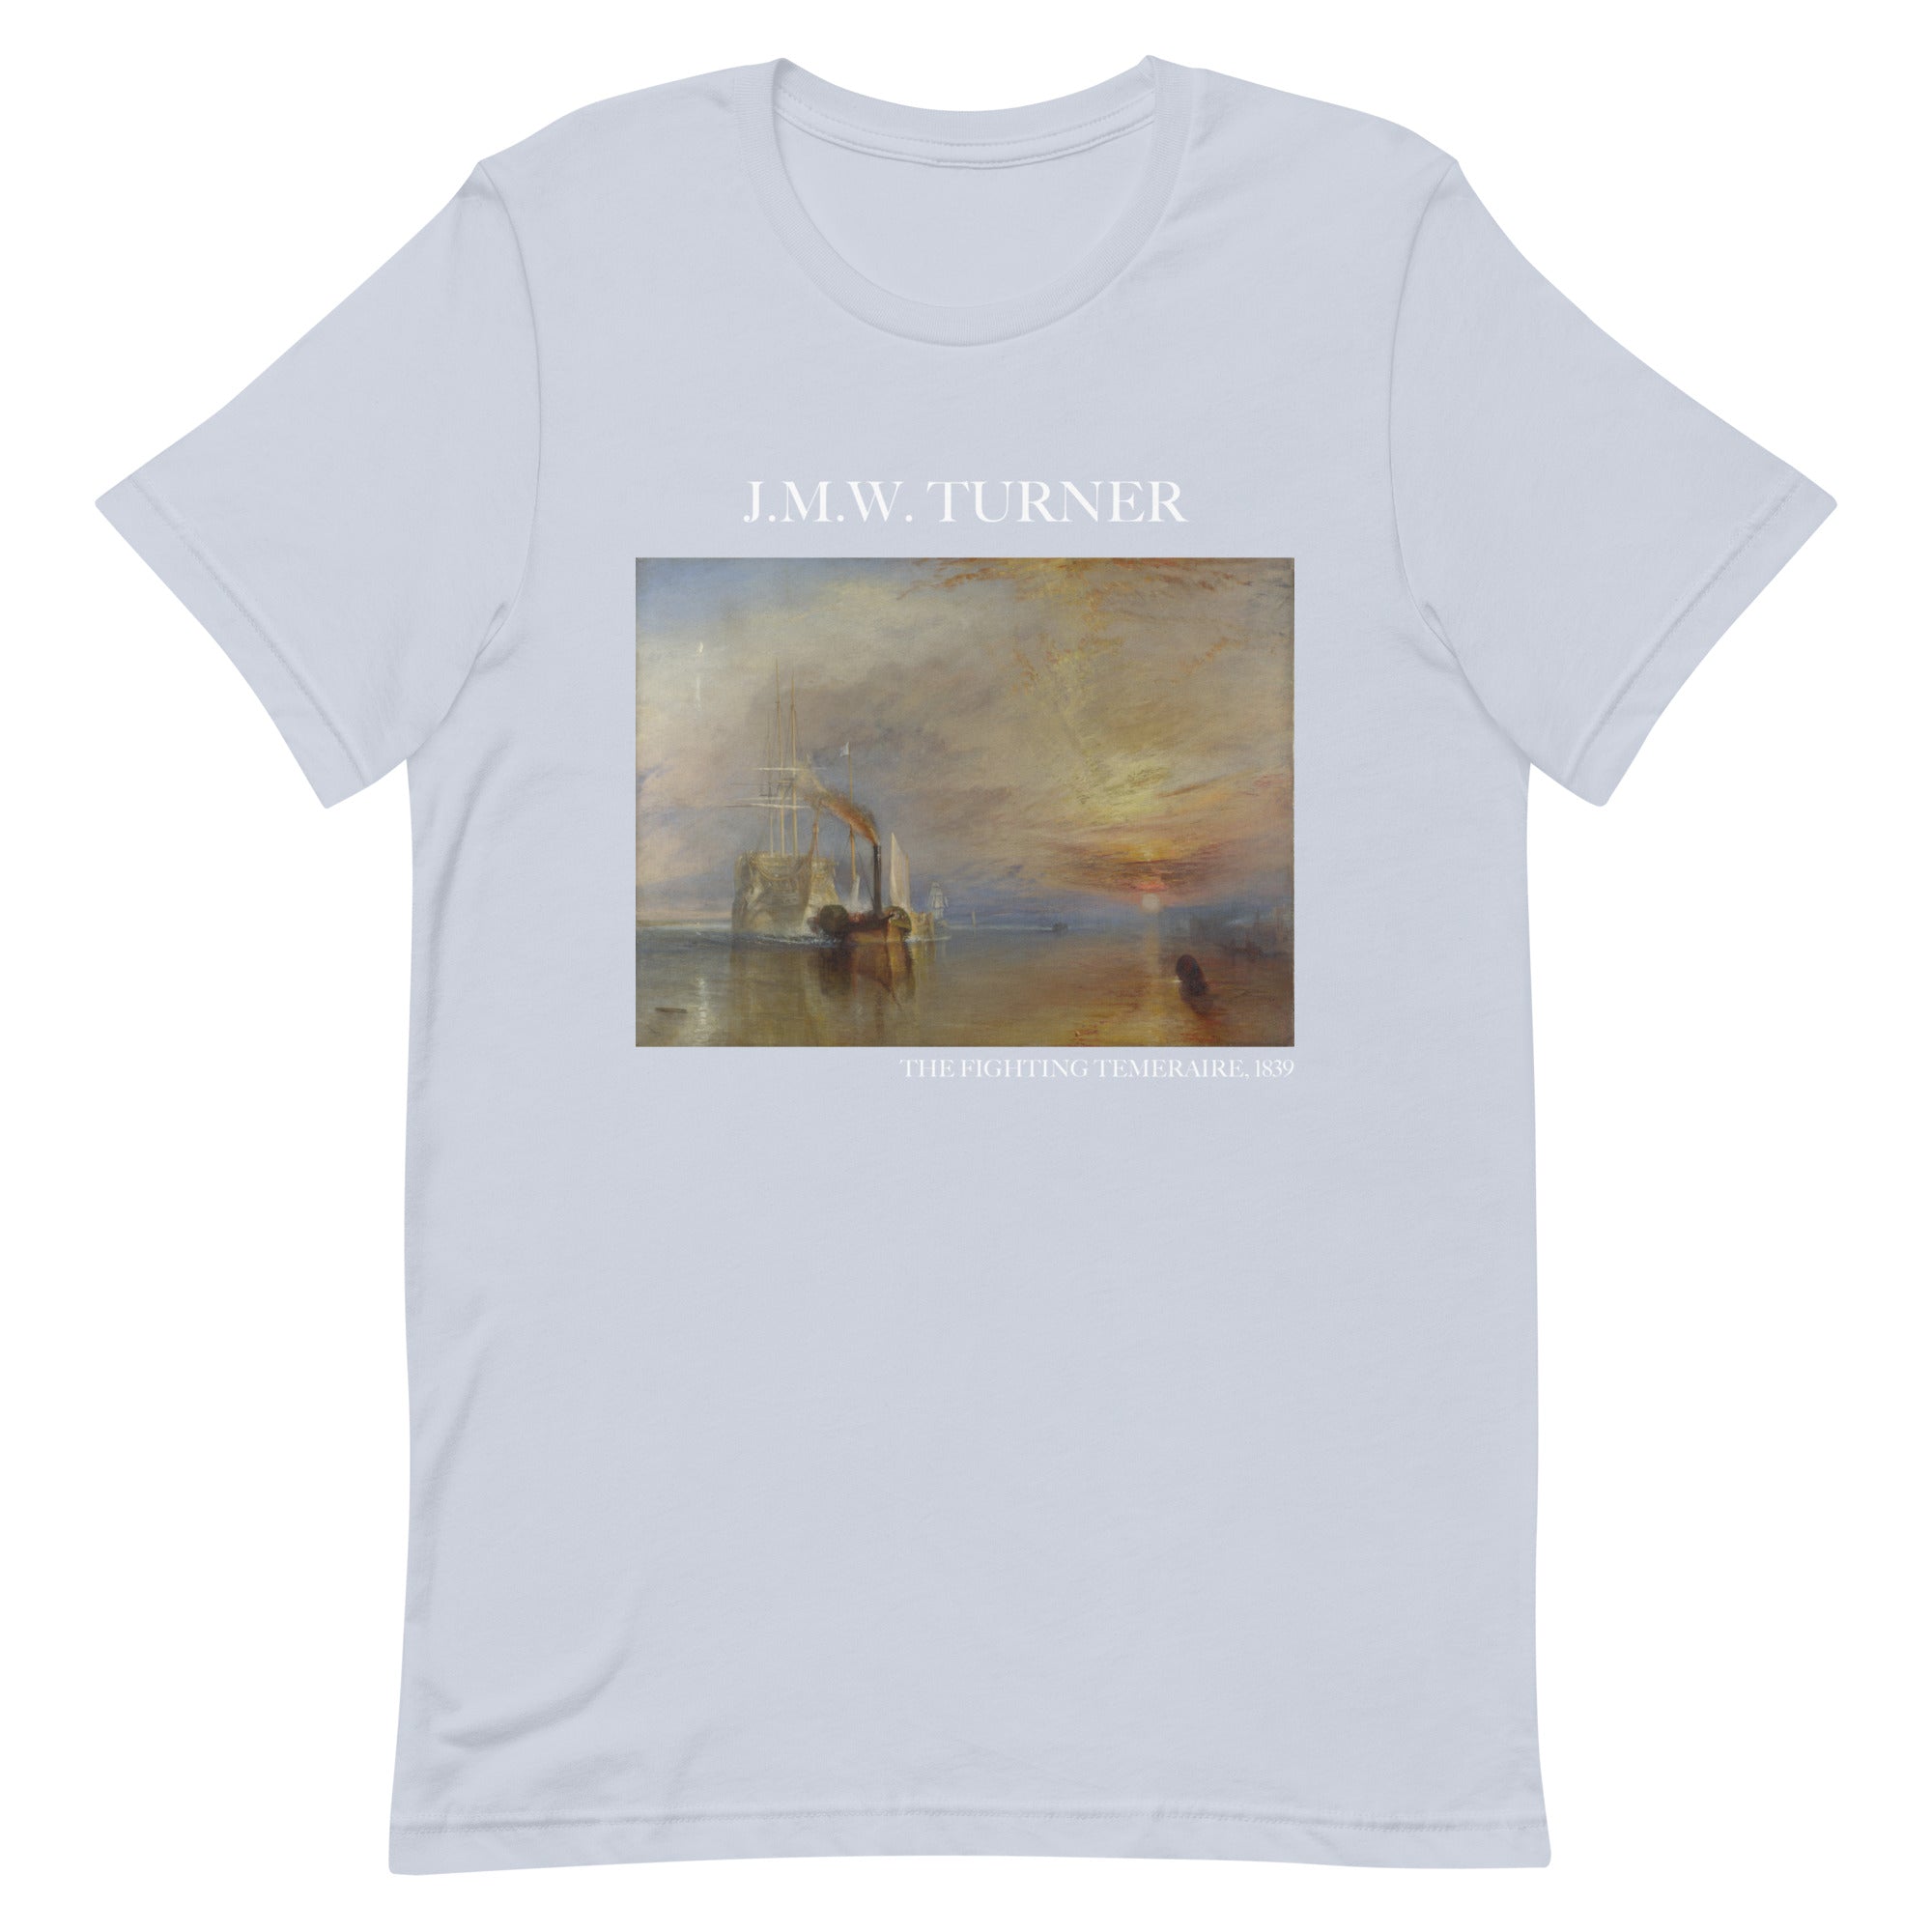 J.M.W. Turner 'The Fighting Temeraire' Famous Painting T-Shirt | Unisex Classic Art Tee